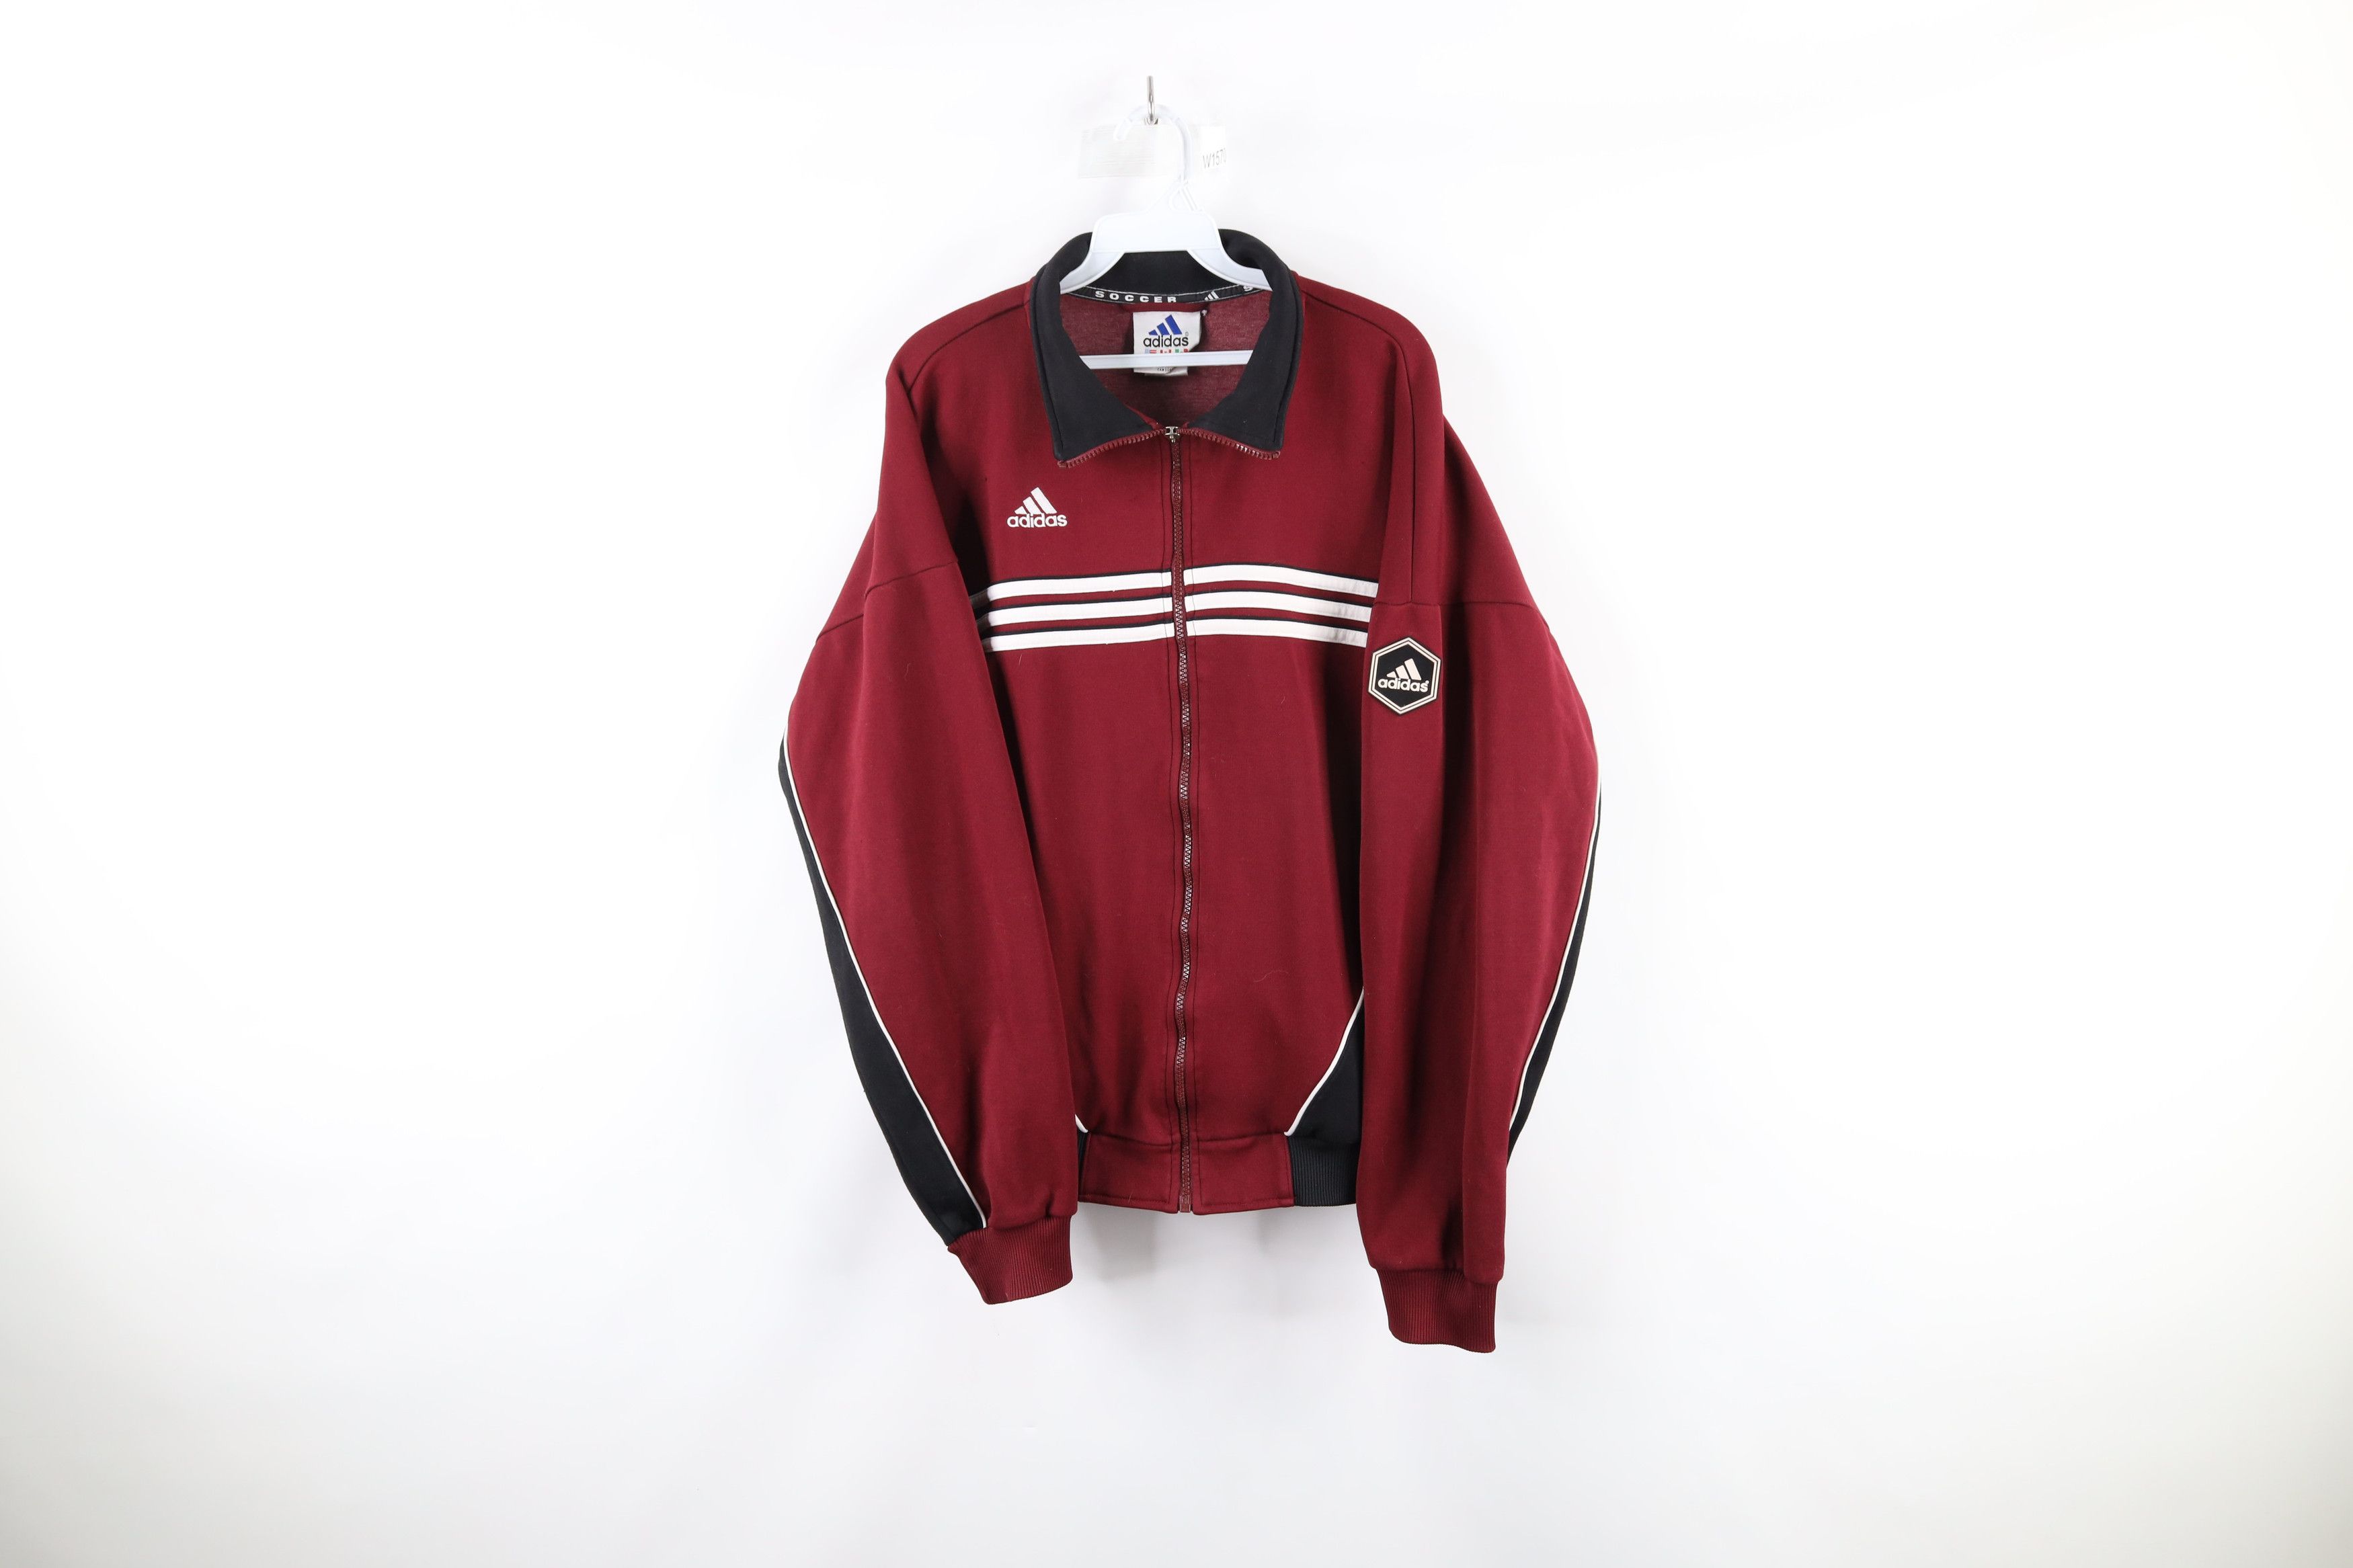 Adidas Vintage Adidas Spell Out Striped Soccer Warm Up Jacket Size US L / EU 52-54 / 3 - 1 Preview